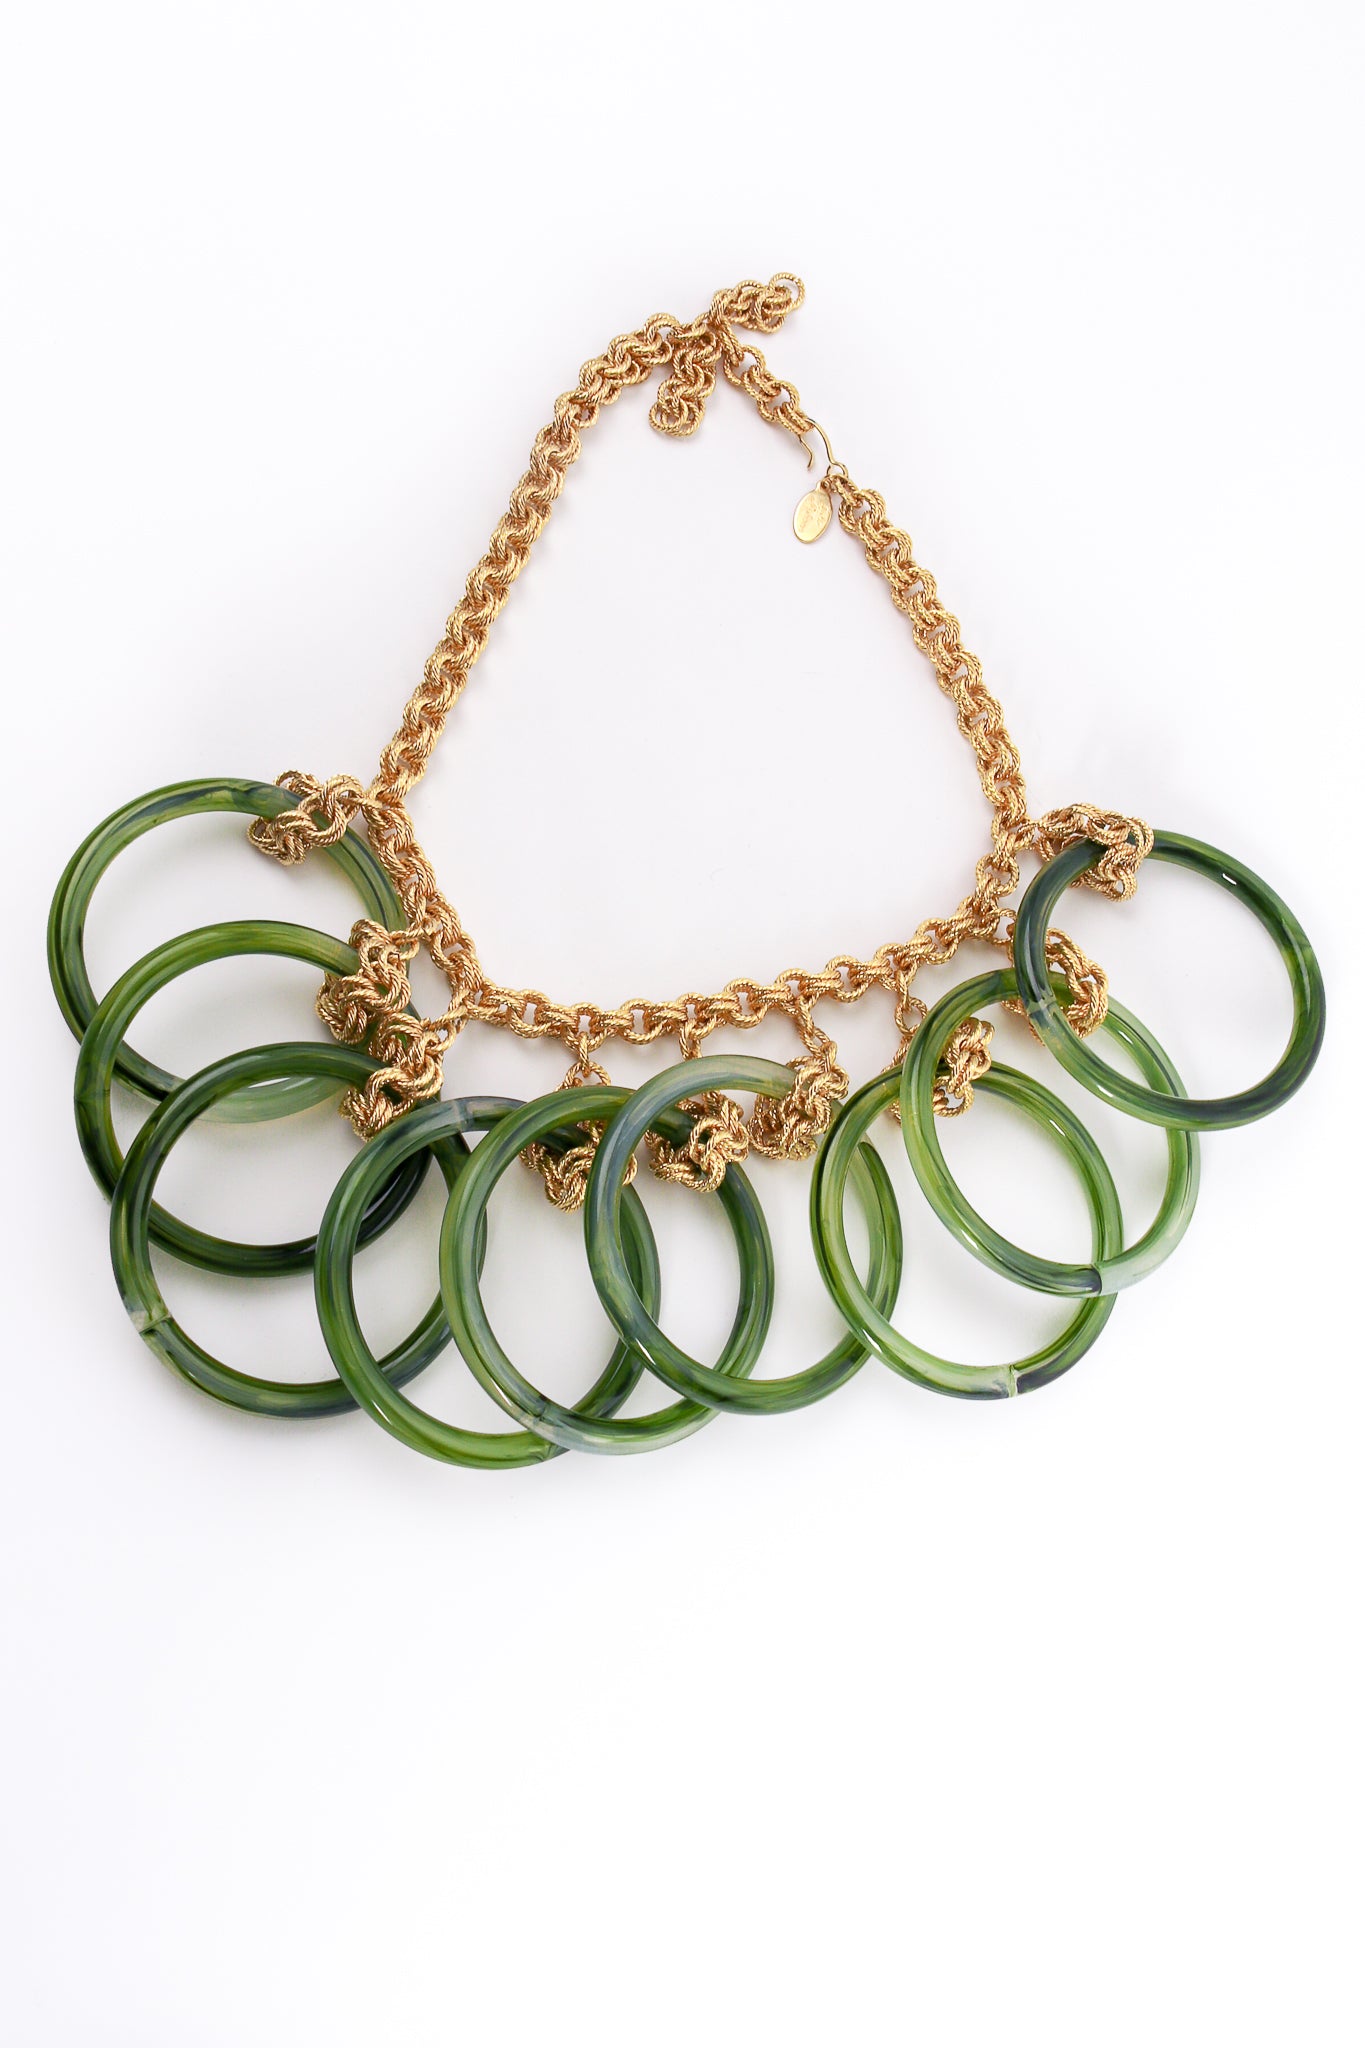 Large Lucite Rings Chain Necklace & Bangle Set